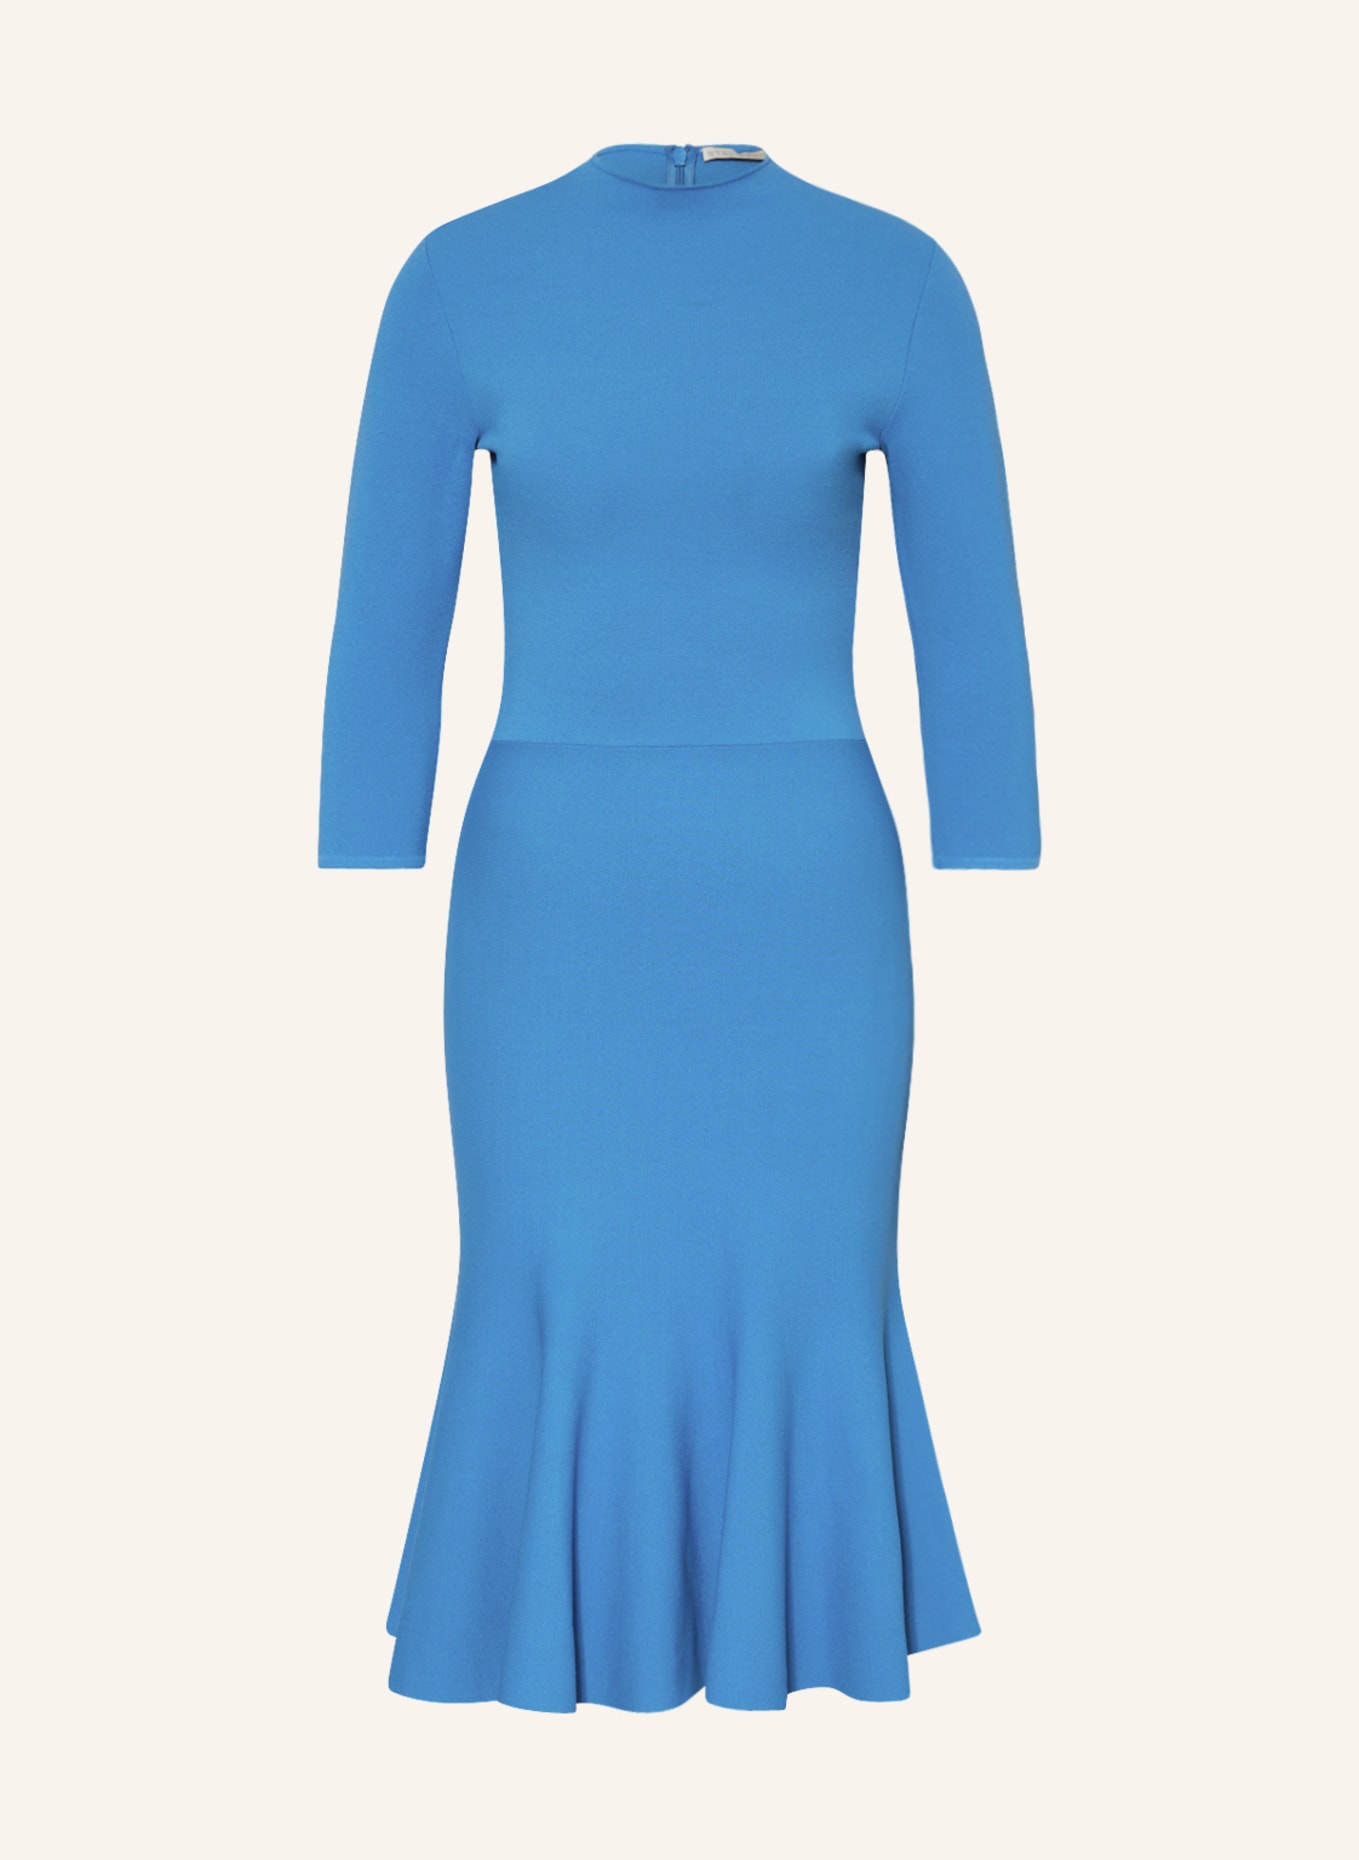 STELLA McCARTNEY Knit dress with 3/4 sleeve, Color: BLUE (Image 1)